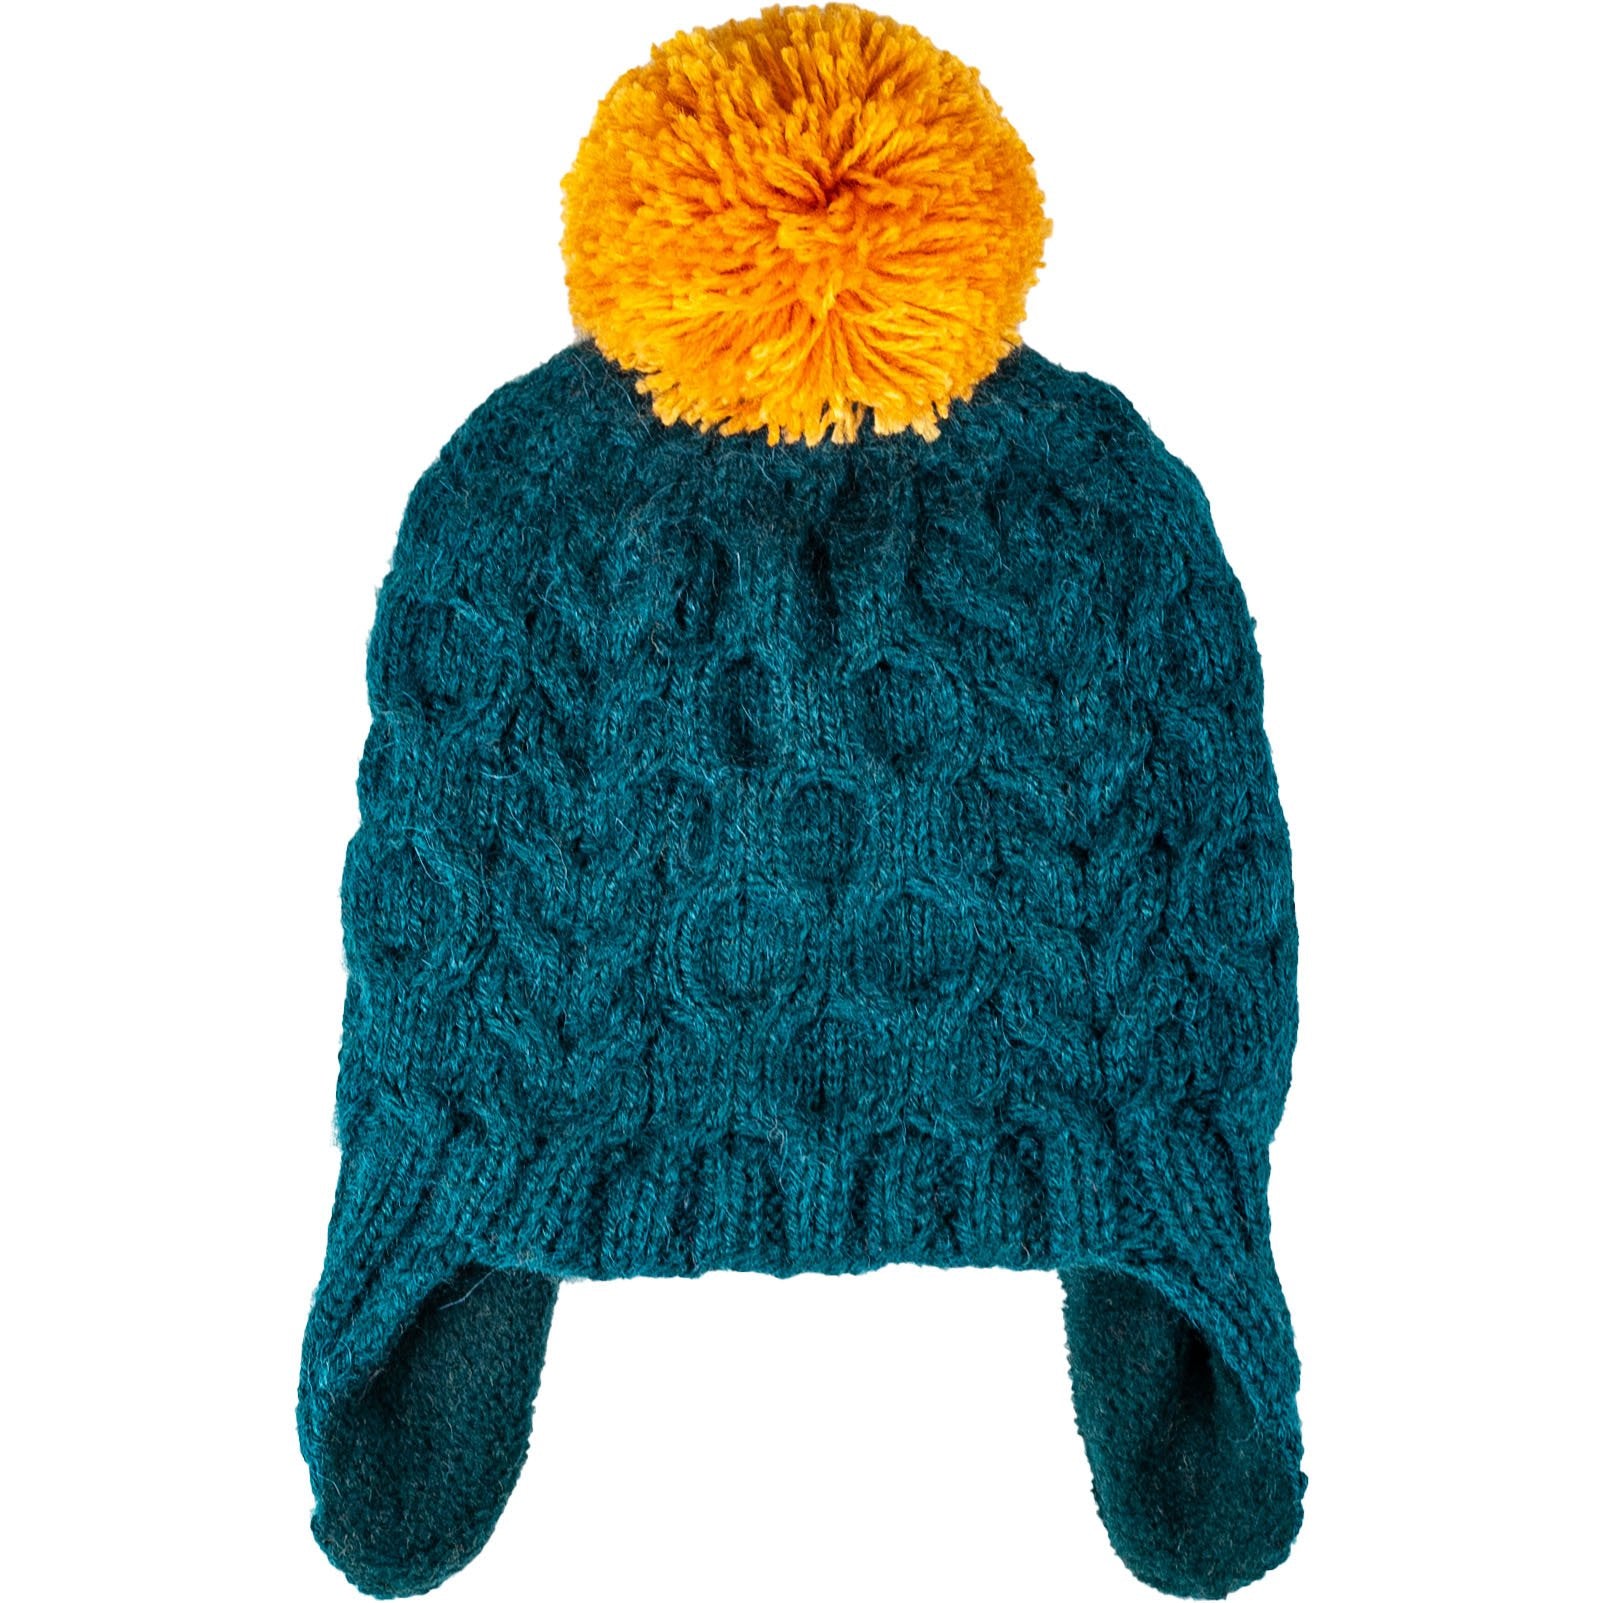 Blue Cable Hat with Yellow Pompom